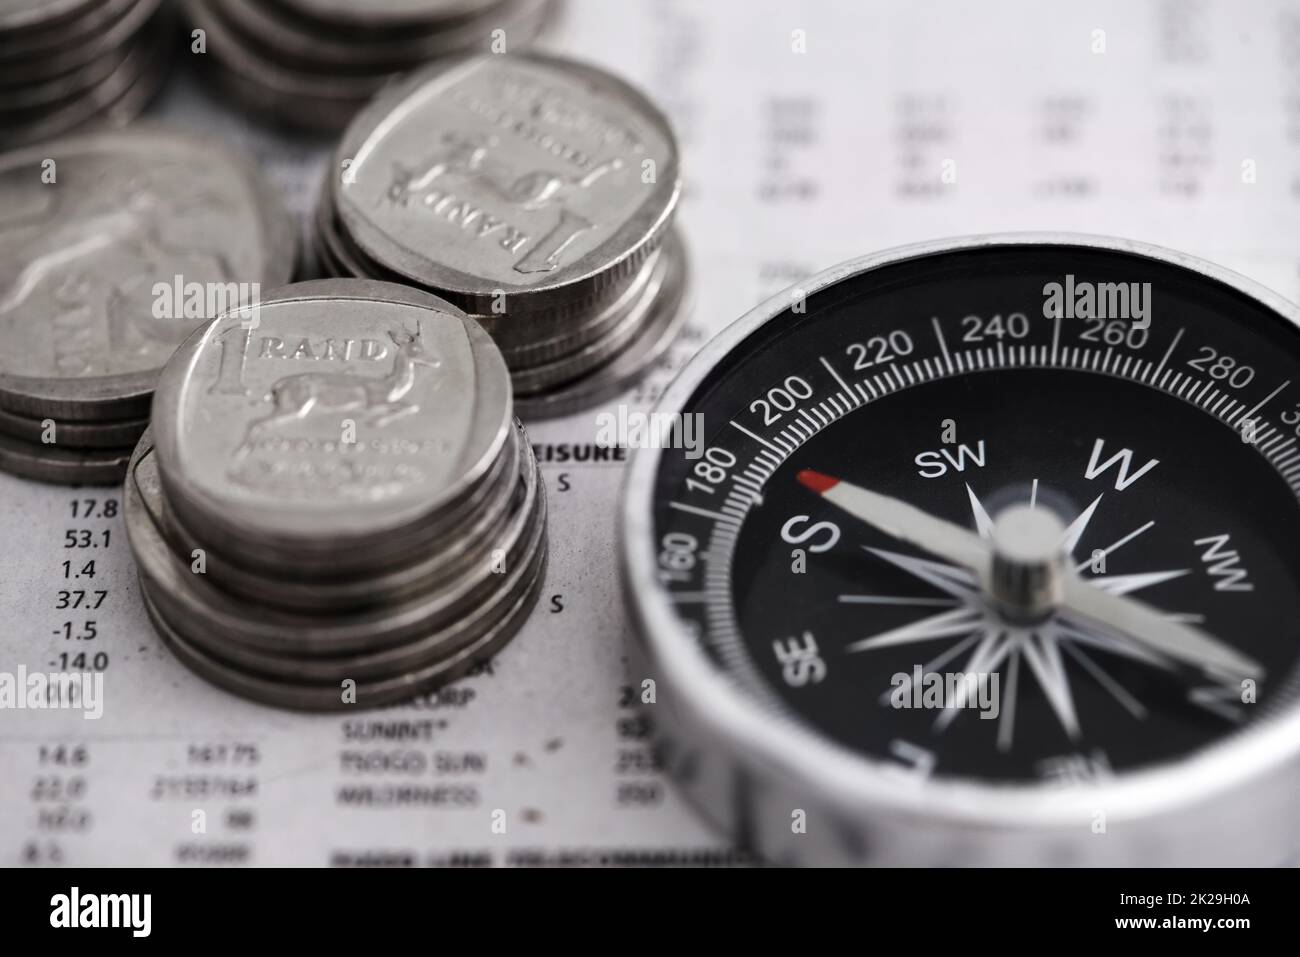 Finding my way into the market. Studio shot of coins and a compass on the business section of a newspaper. Stock Photo